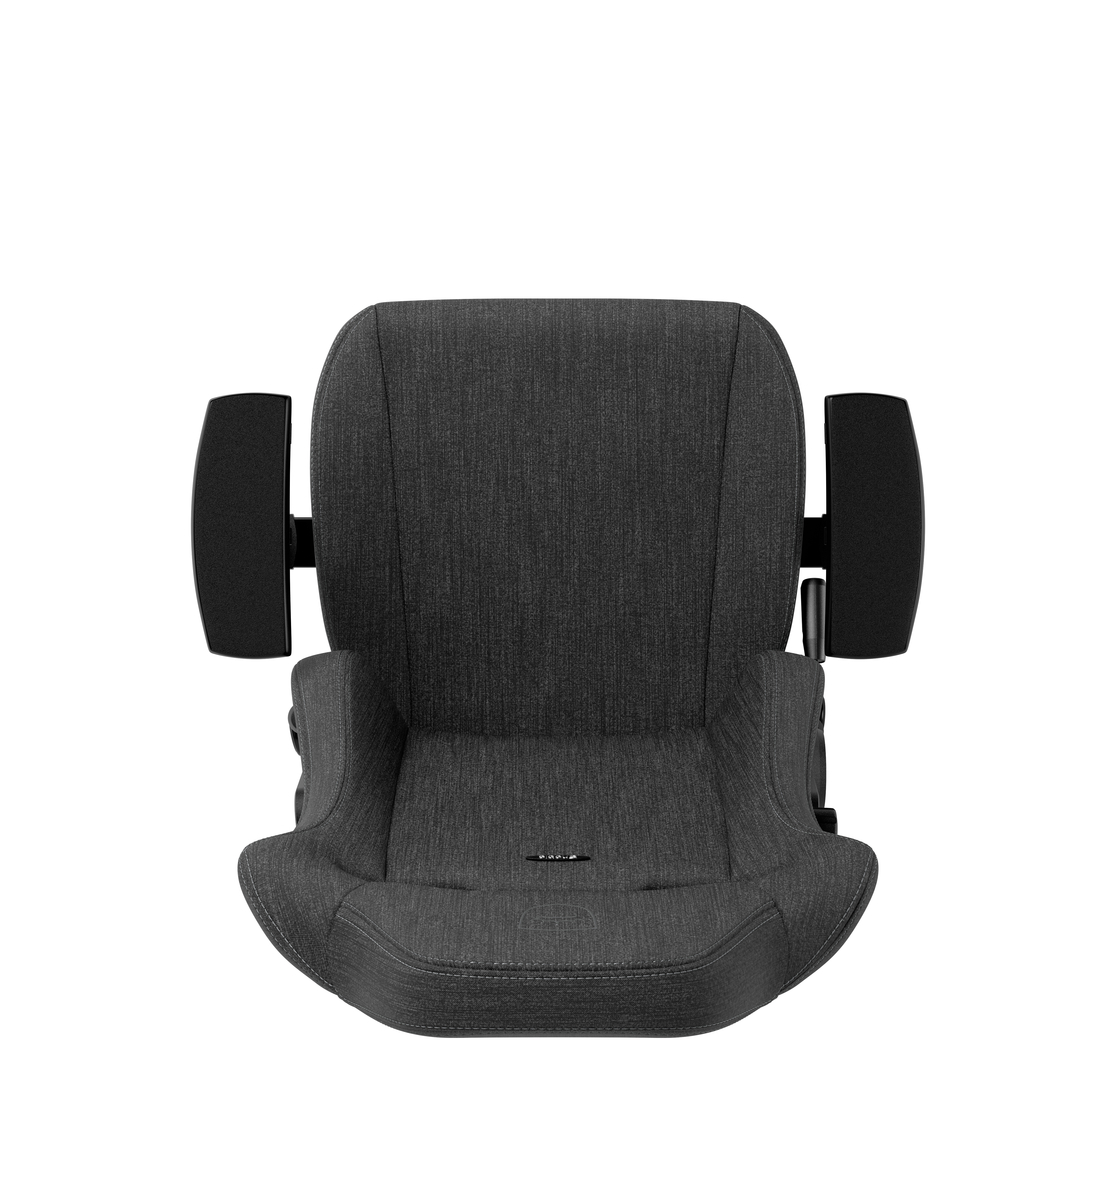 noblechairs HERO ST TX Gaming Chair - antrazit